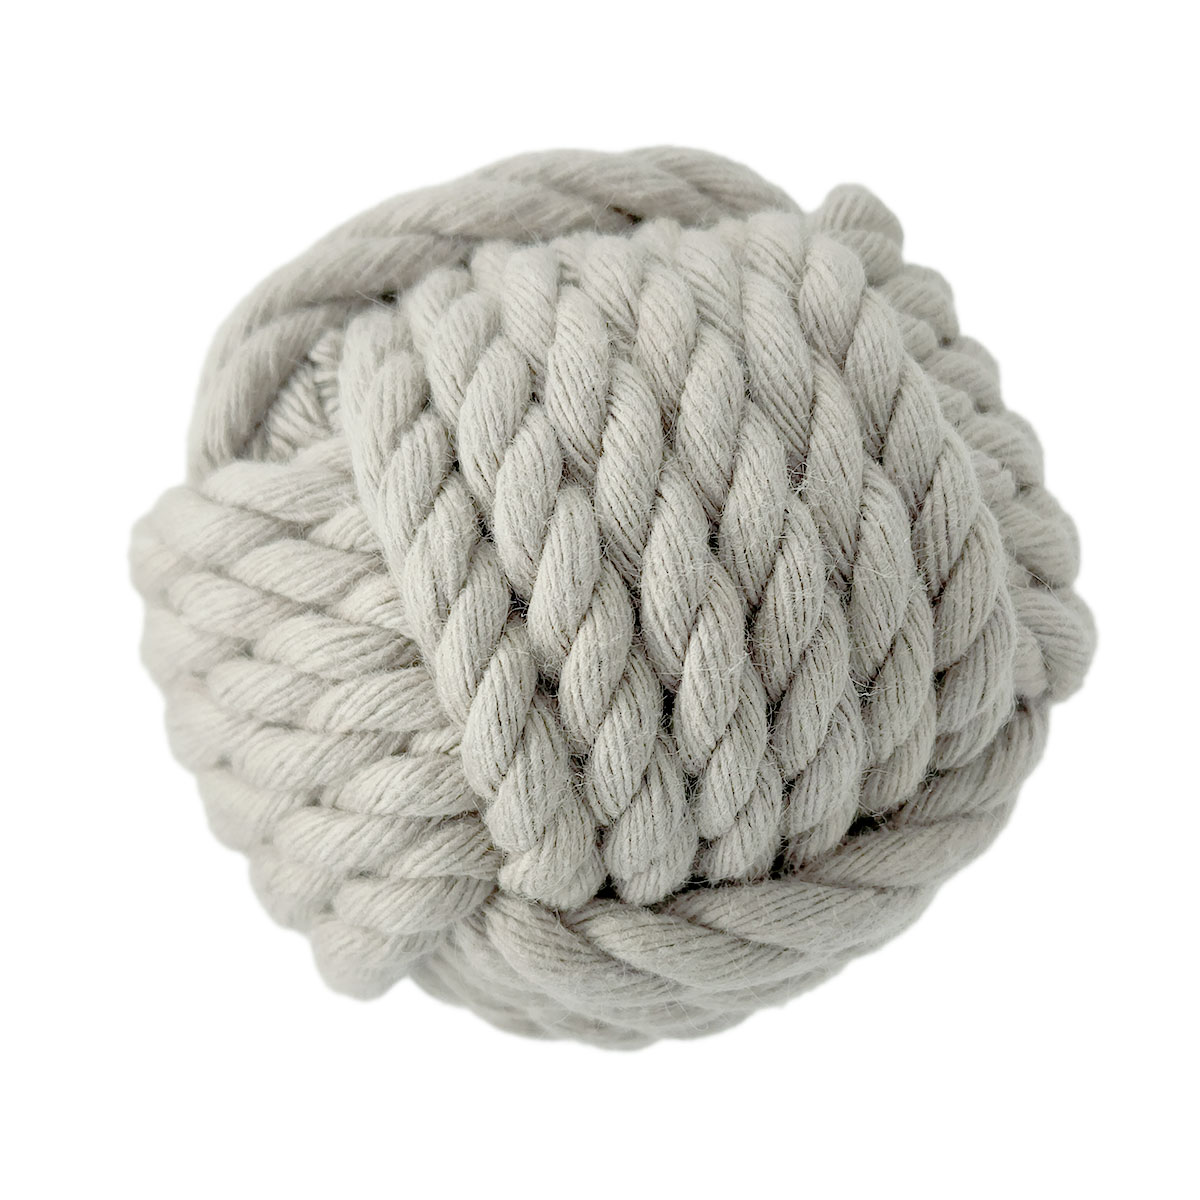 Twisted 3 Strand Glitter Natural Cotton Rope – 1/4 Inch and 1/2